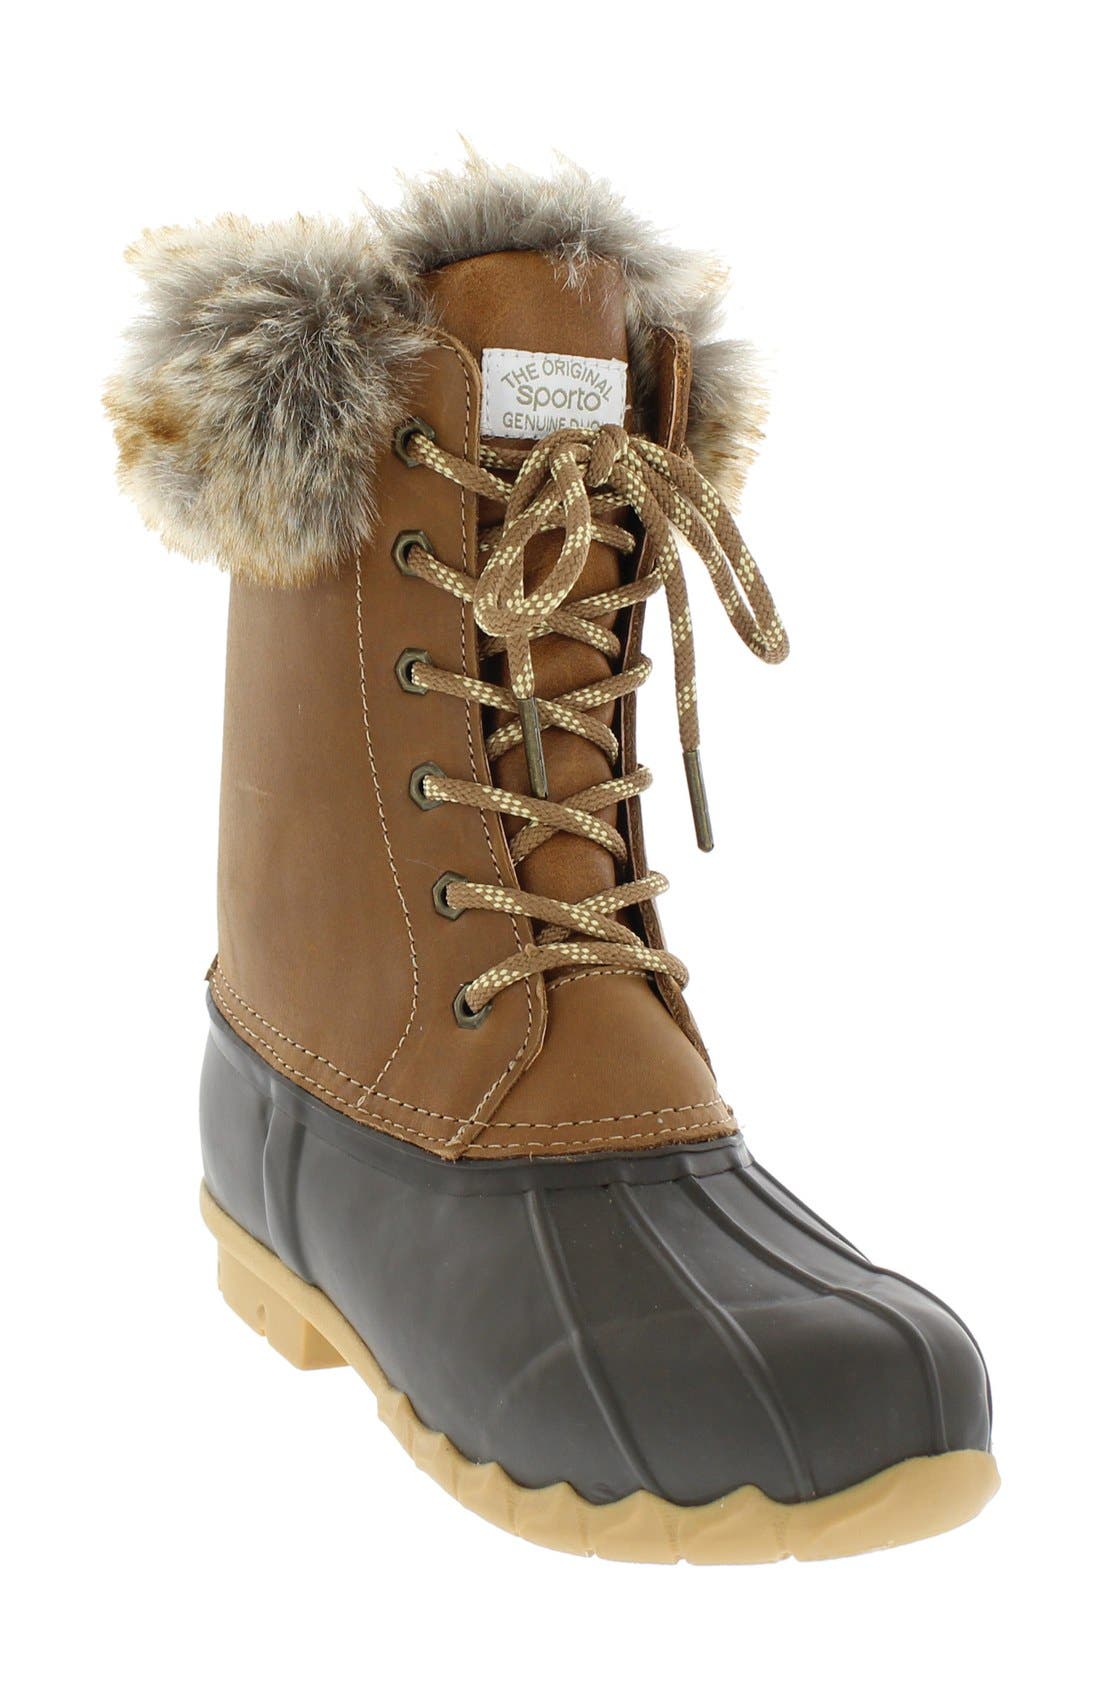 duck boots with fur